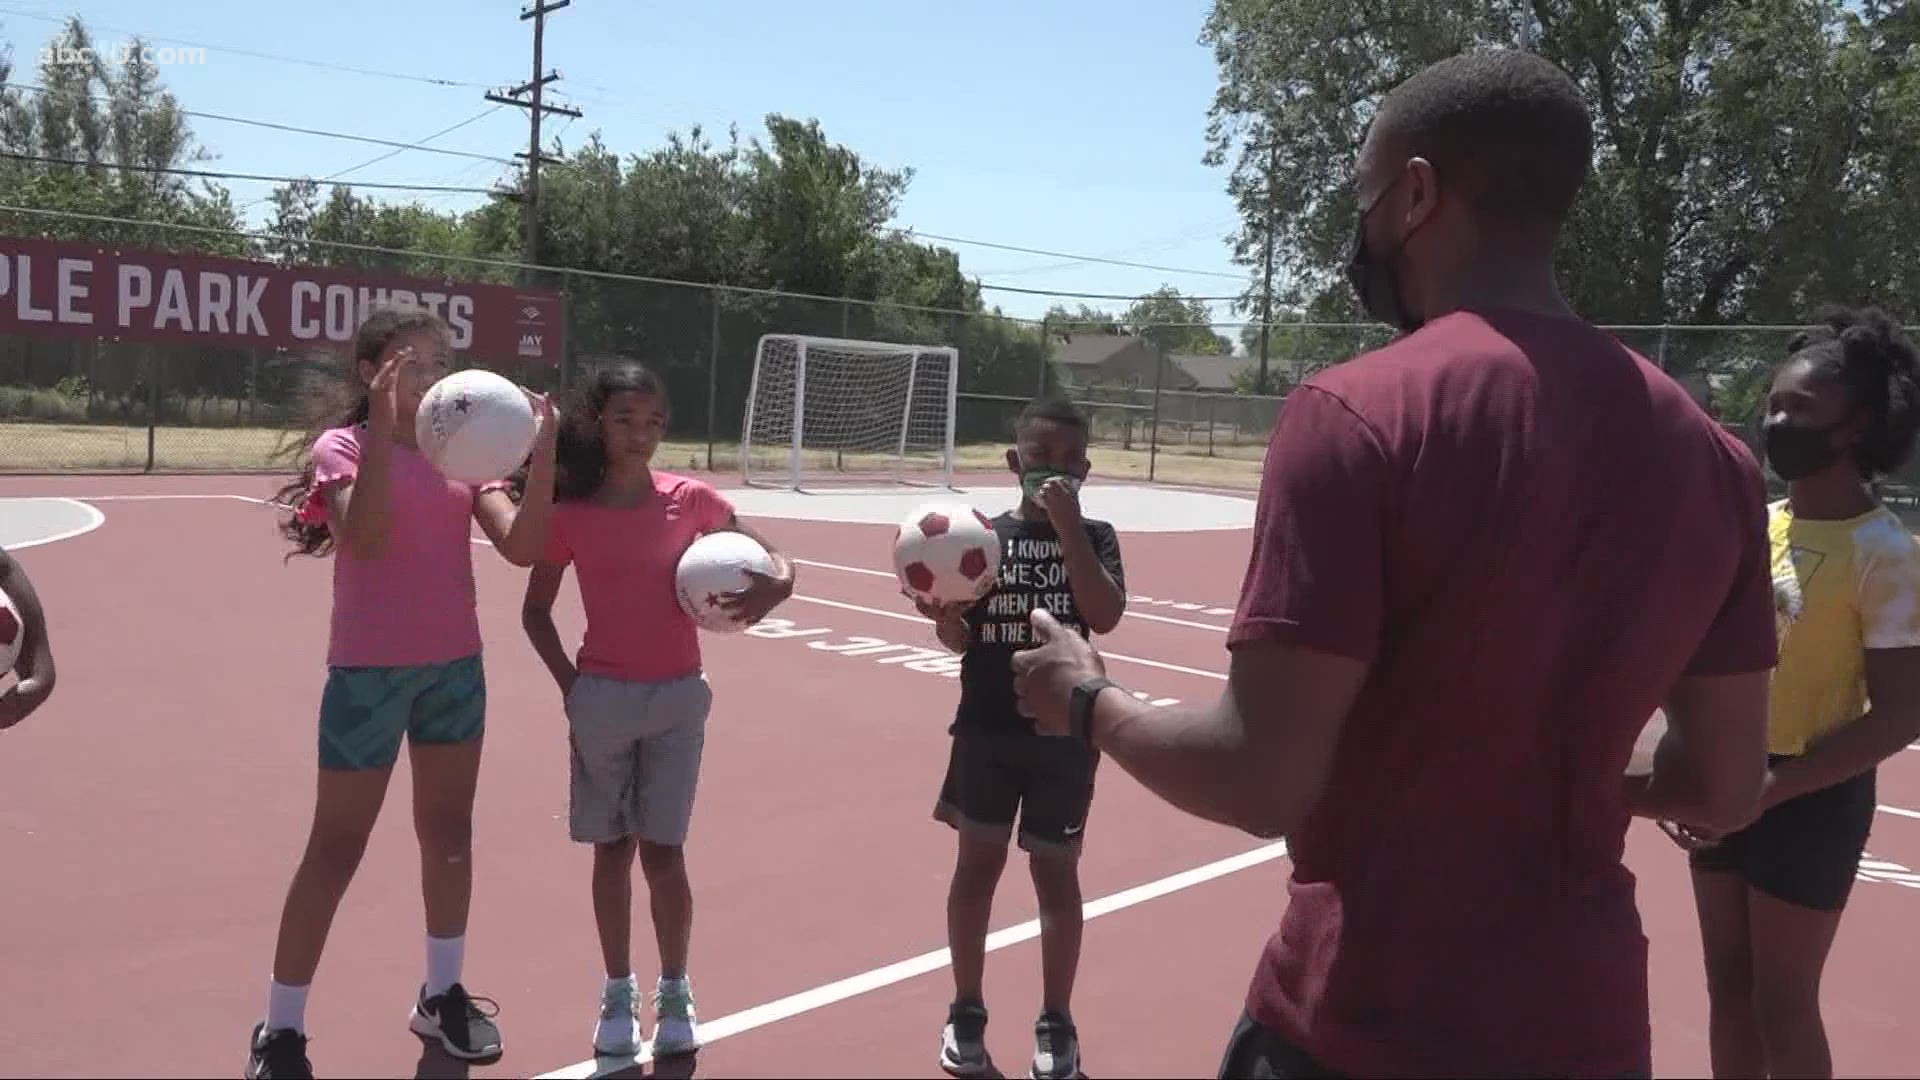 Jordan McCrary is using soccer as a vehicle to teach life skills to local kids in underrepresented communities.